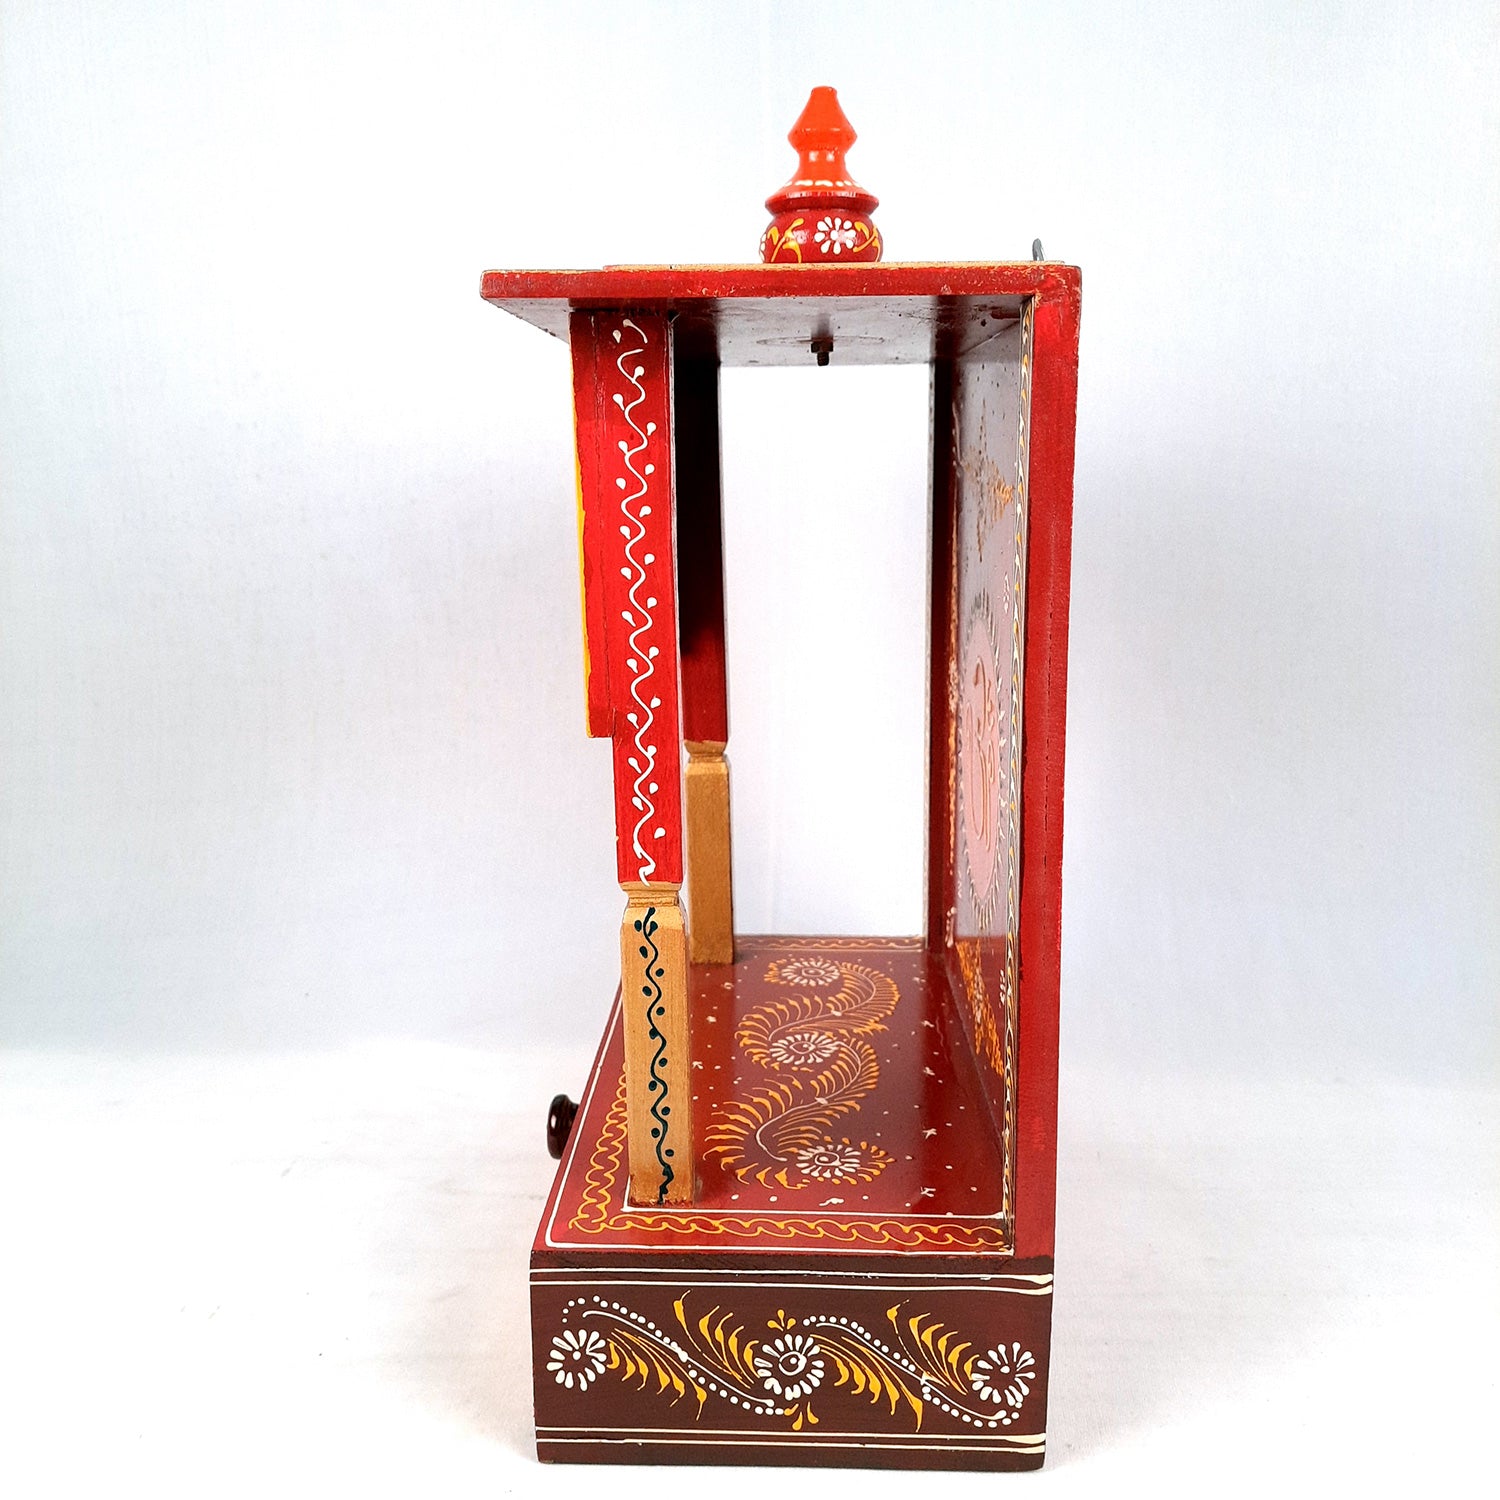 Pooja Mandir With Drawer | Home Temple Wooden Wall Mounted With Storage | Hanging Puja Stand / Unit With Detachable Gumbad  – For God, House, Puja Ghar, Office & Shop - 17 Inch